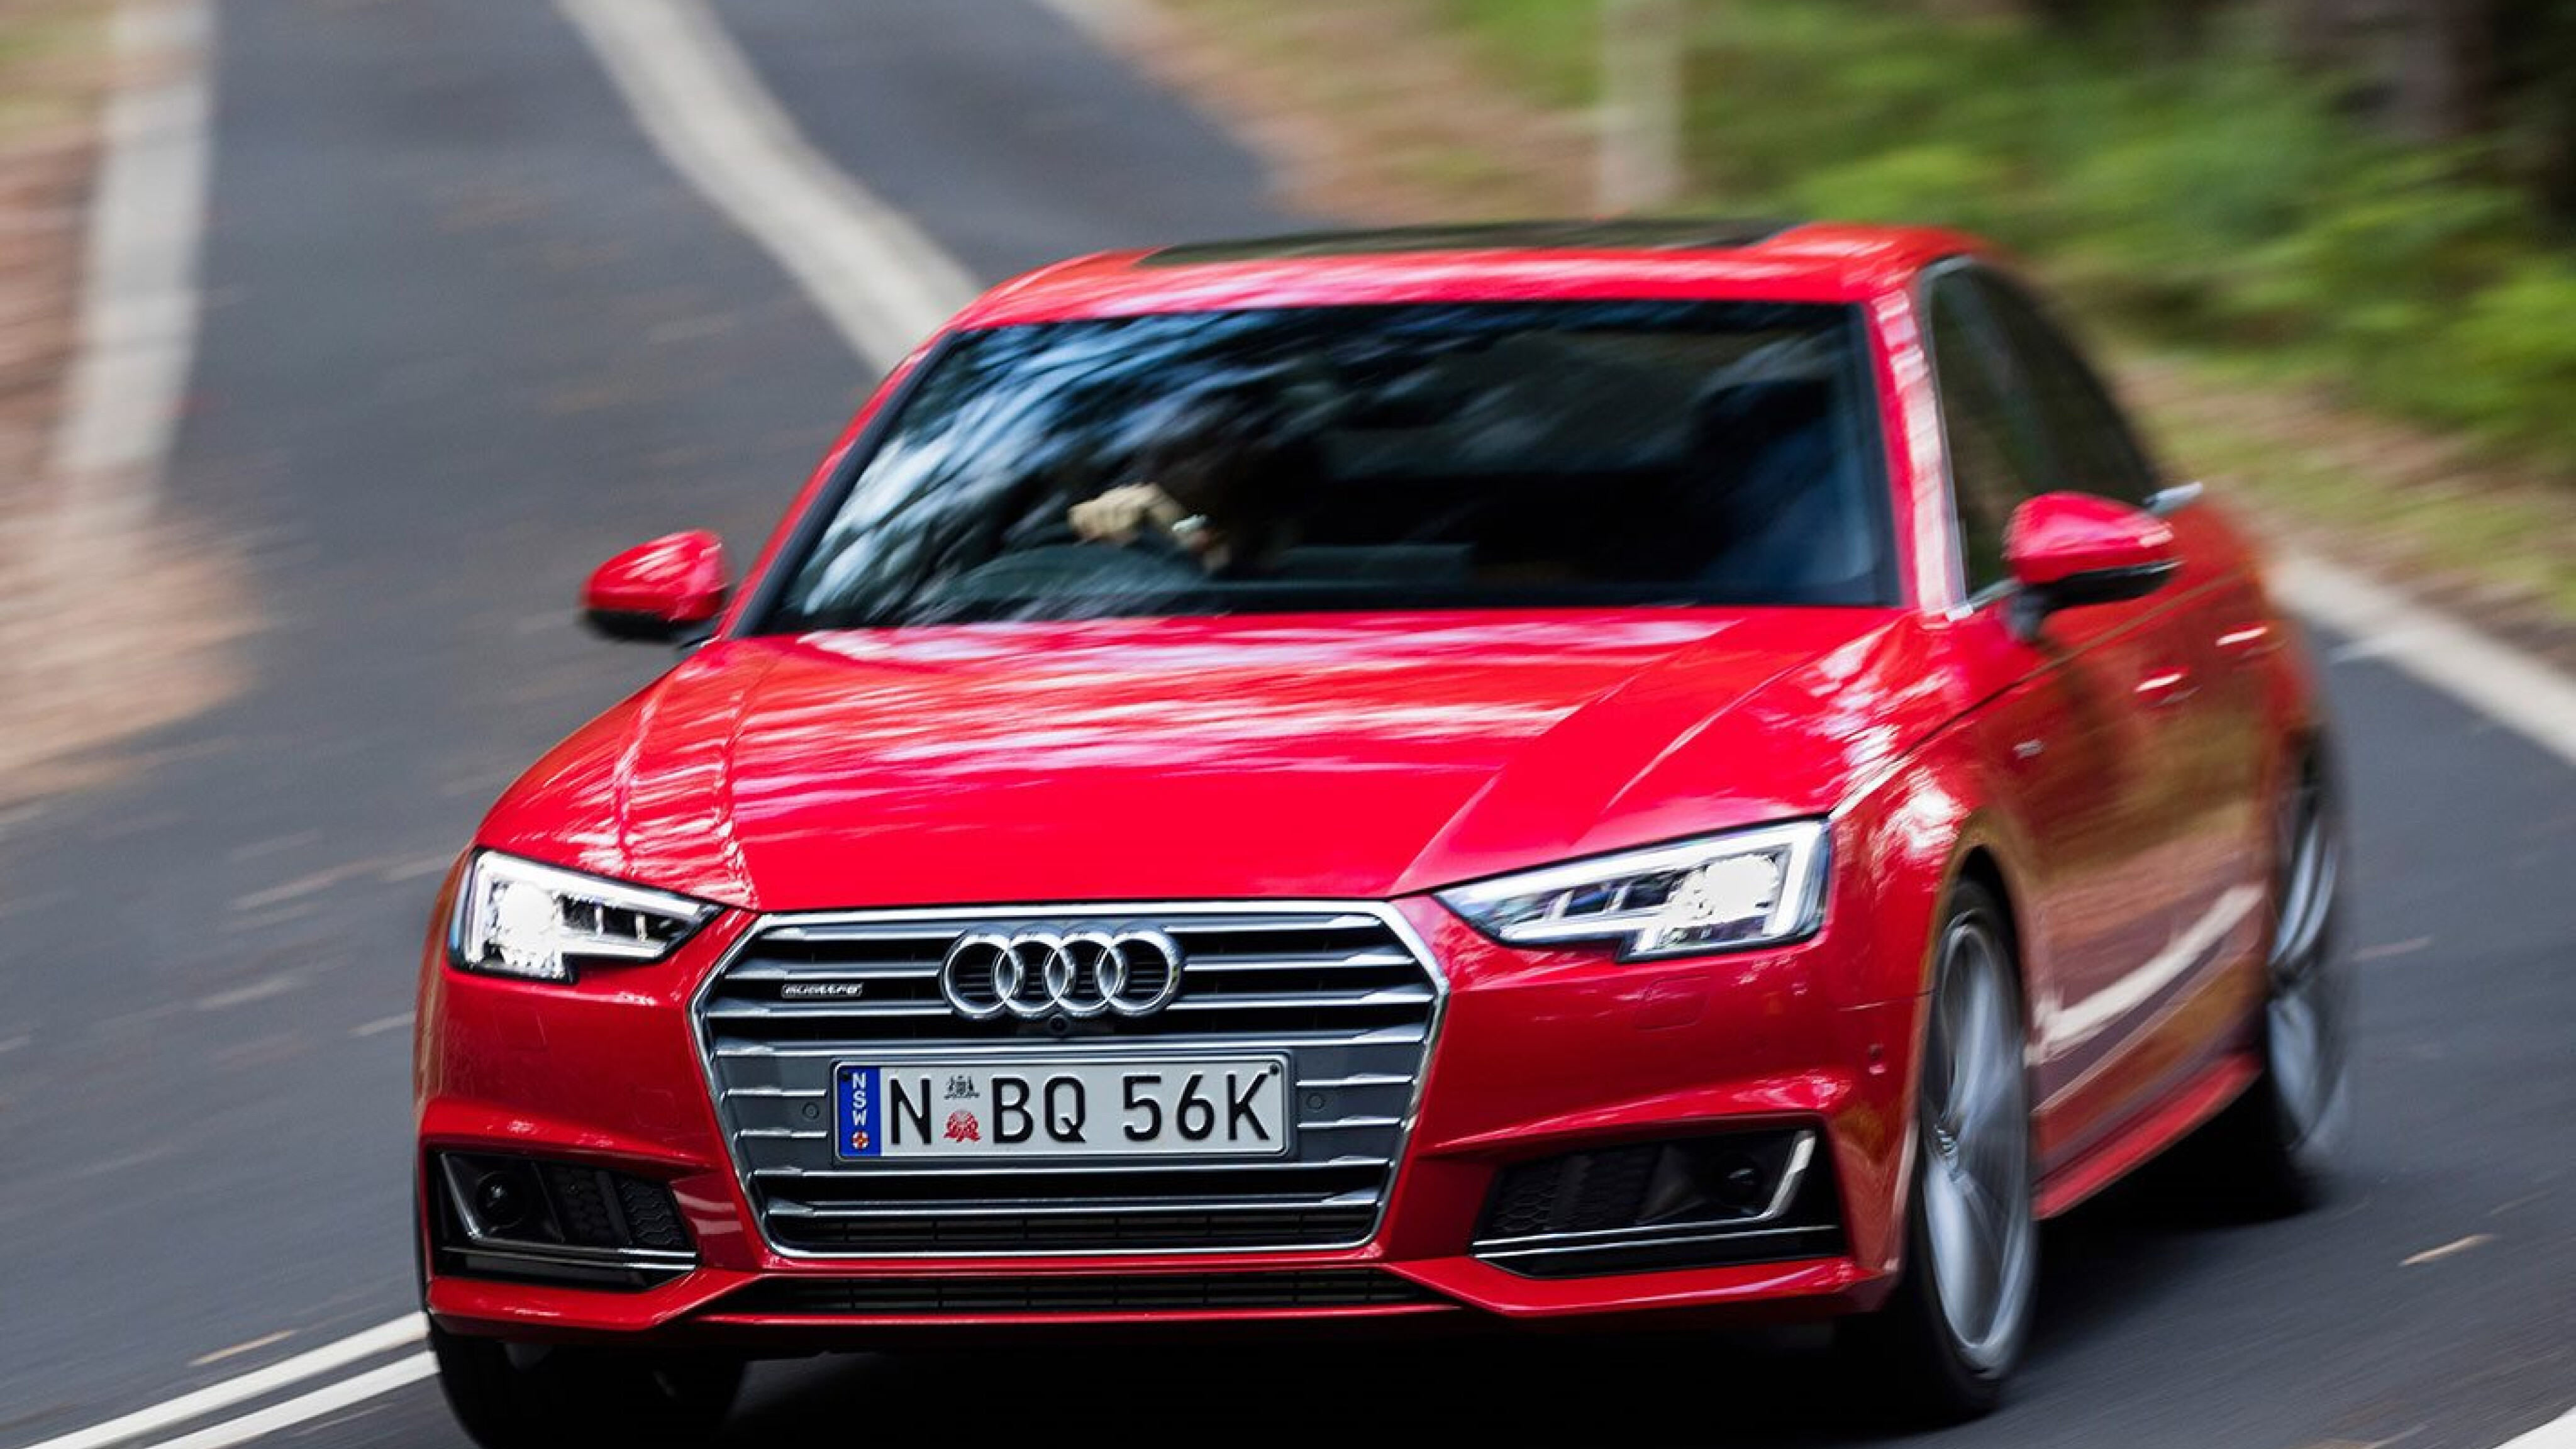 Audi A4 range gets new colours with additional features: All details